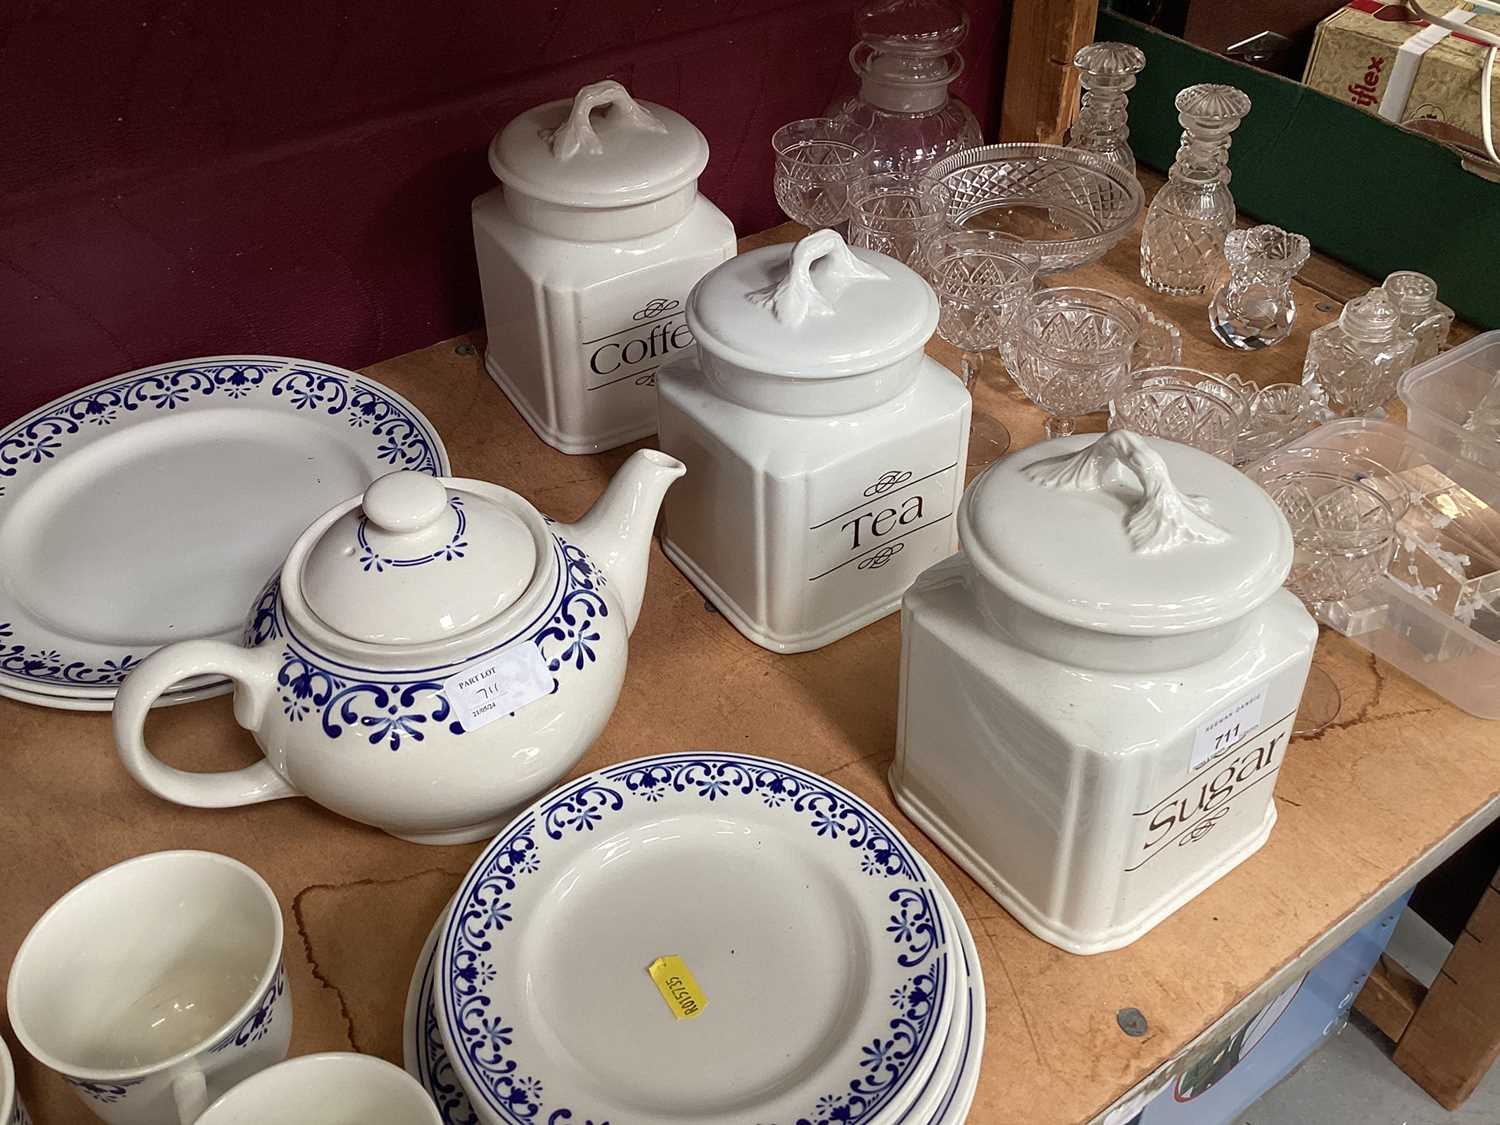 Selection of tea ware, glassware and storage jars (3 shelves) - Image 6 of 6